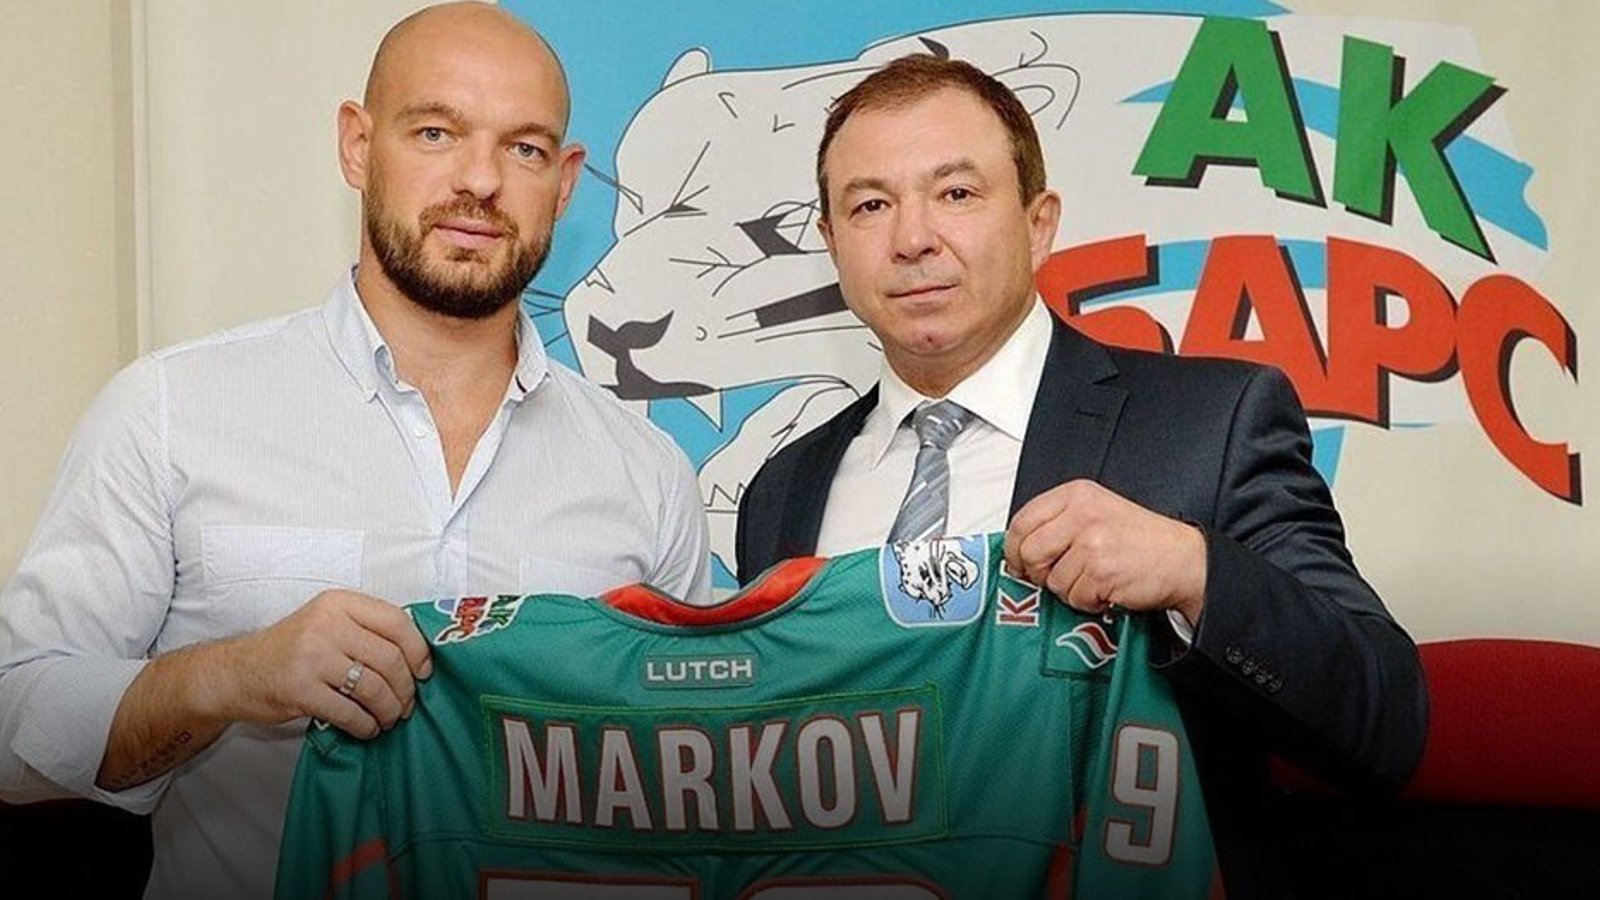 Official: Markov signs in KHL